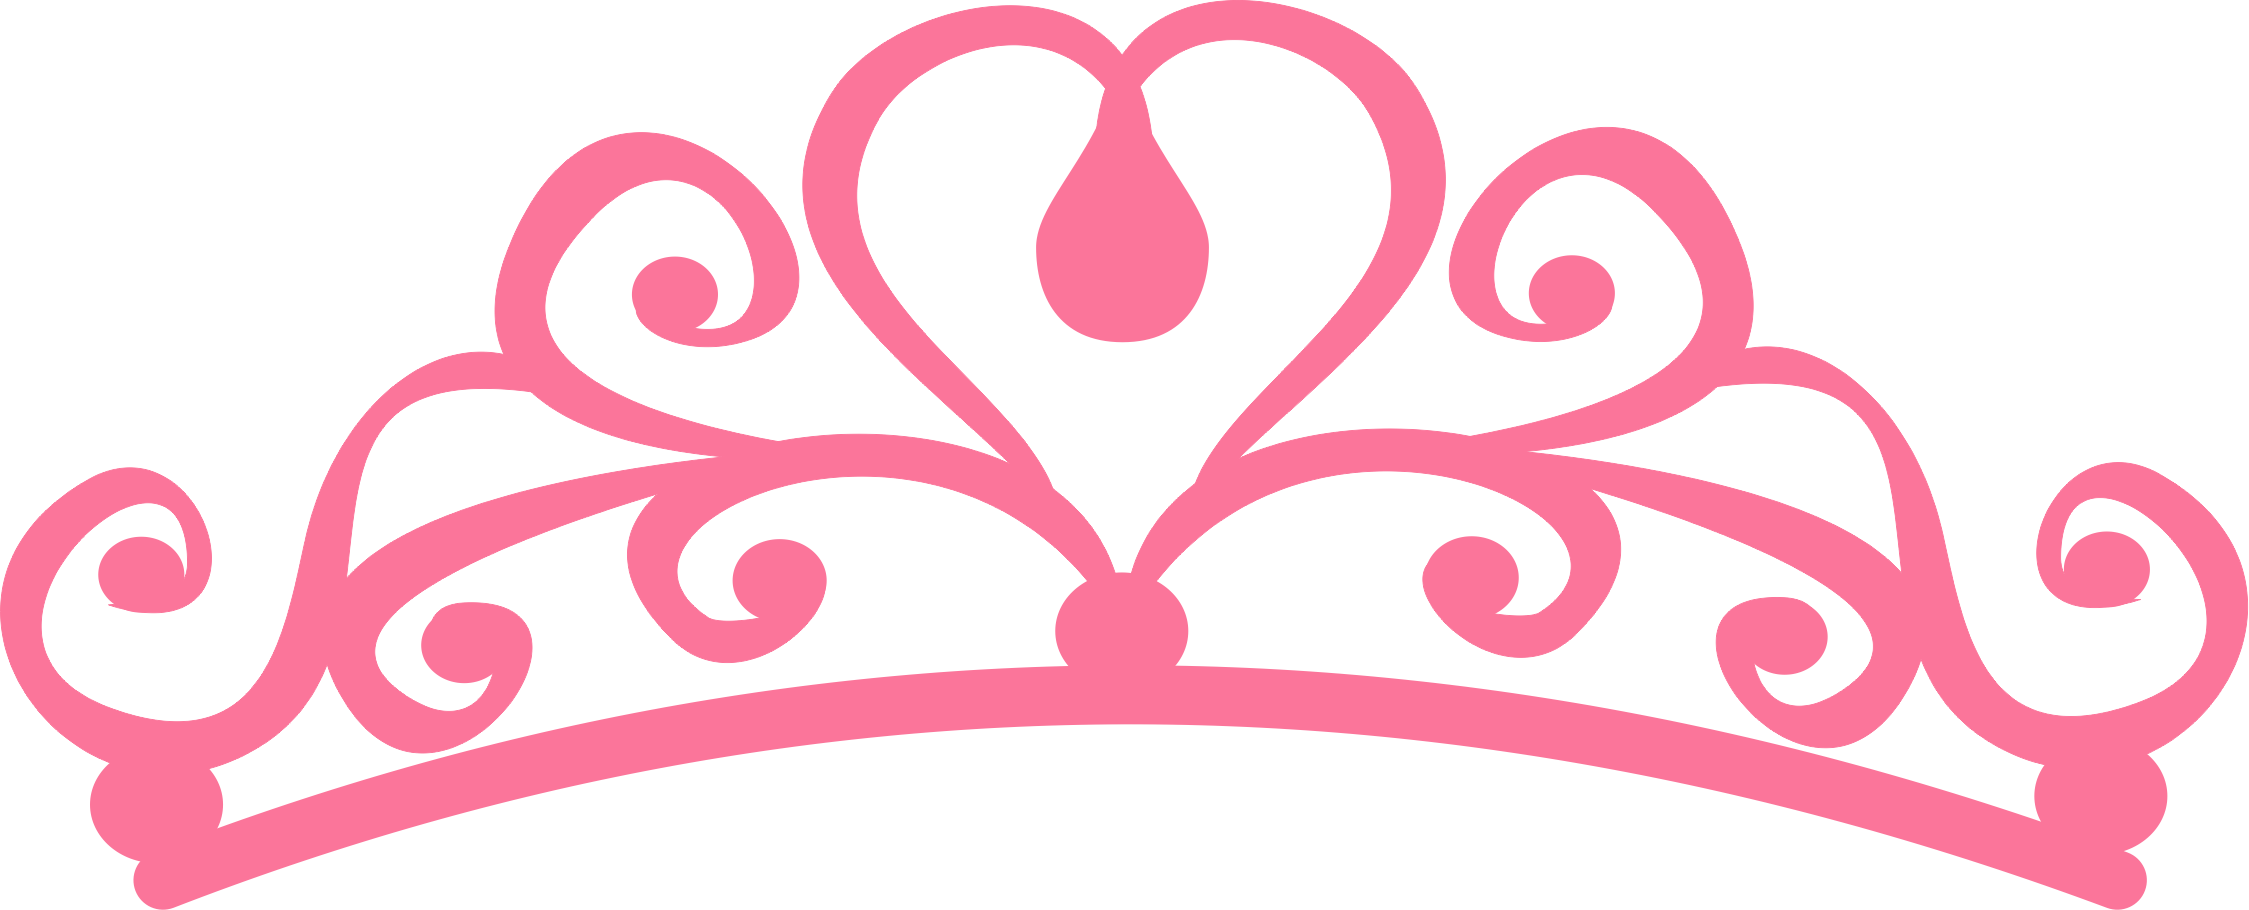 Crown clip art tiara. Images for tattoos ink